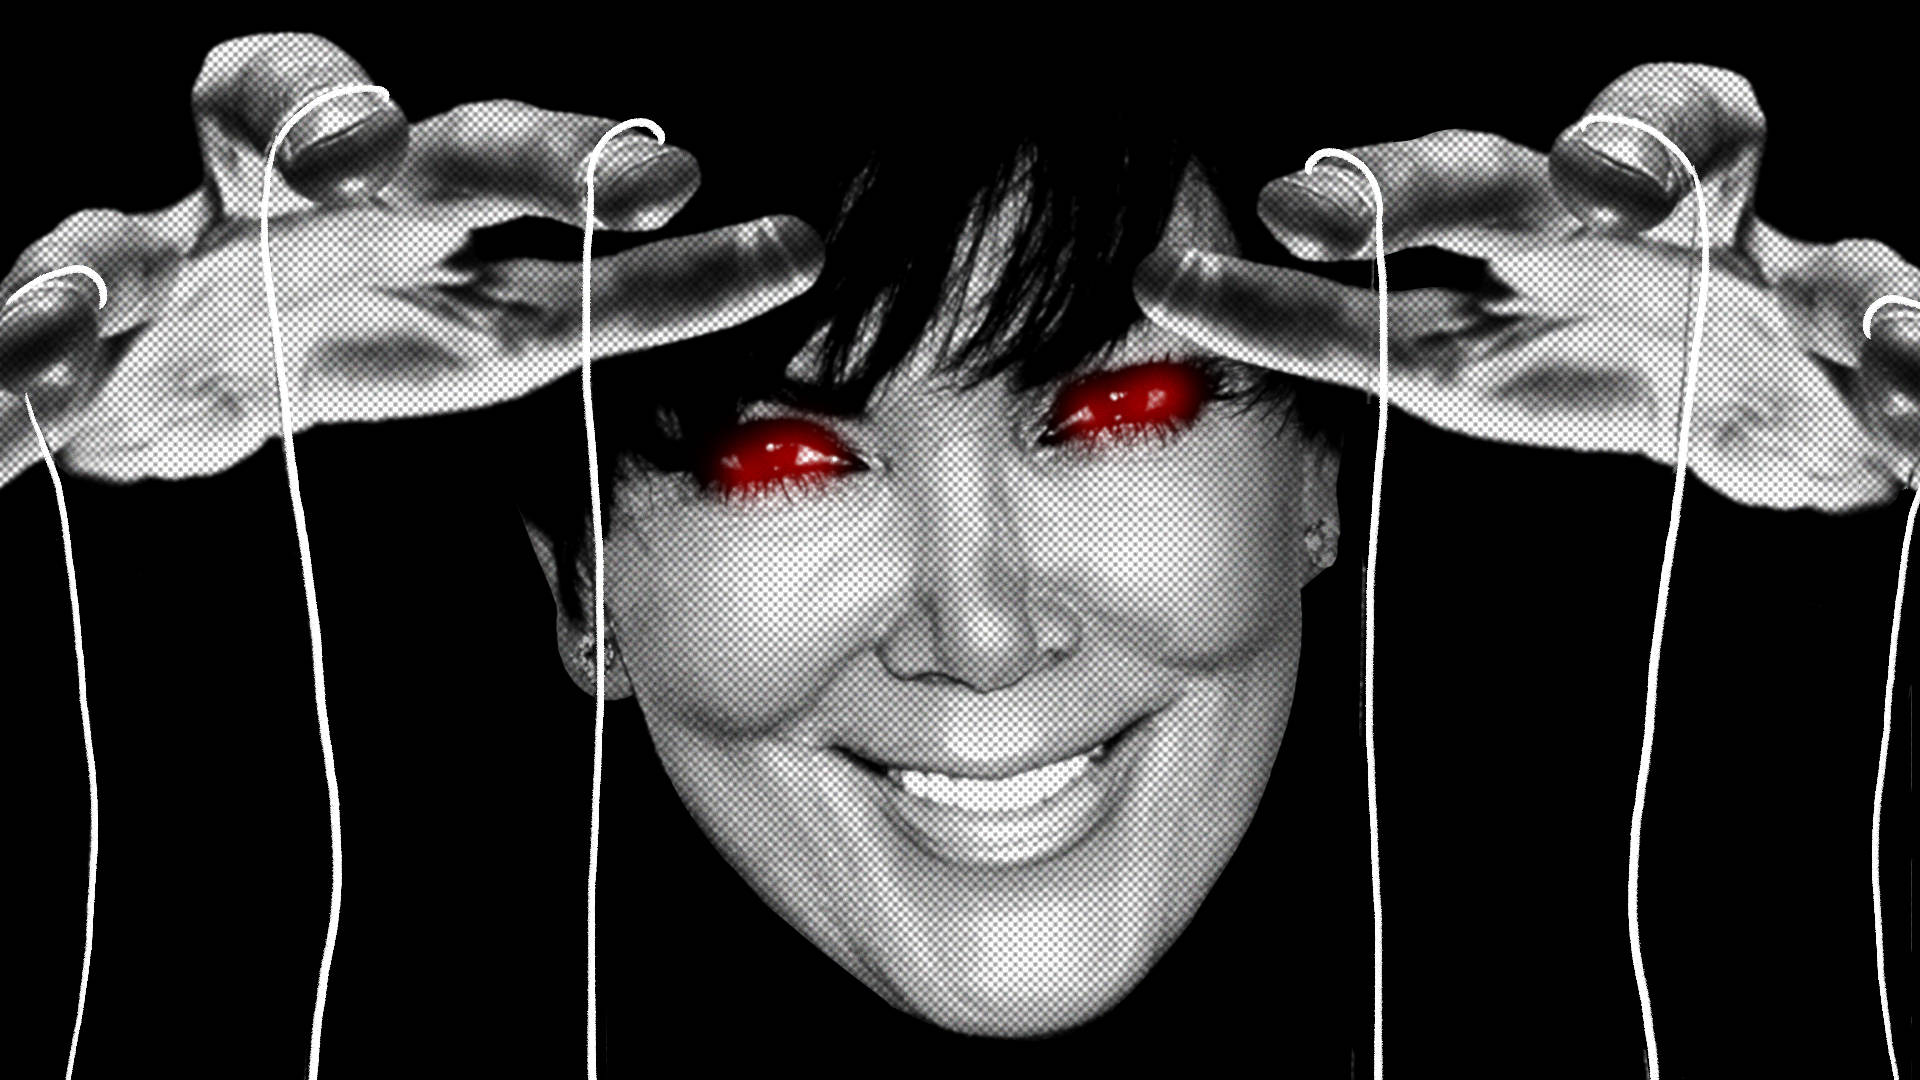 Kris Jenner With Glowing Eyes